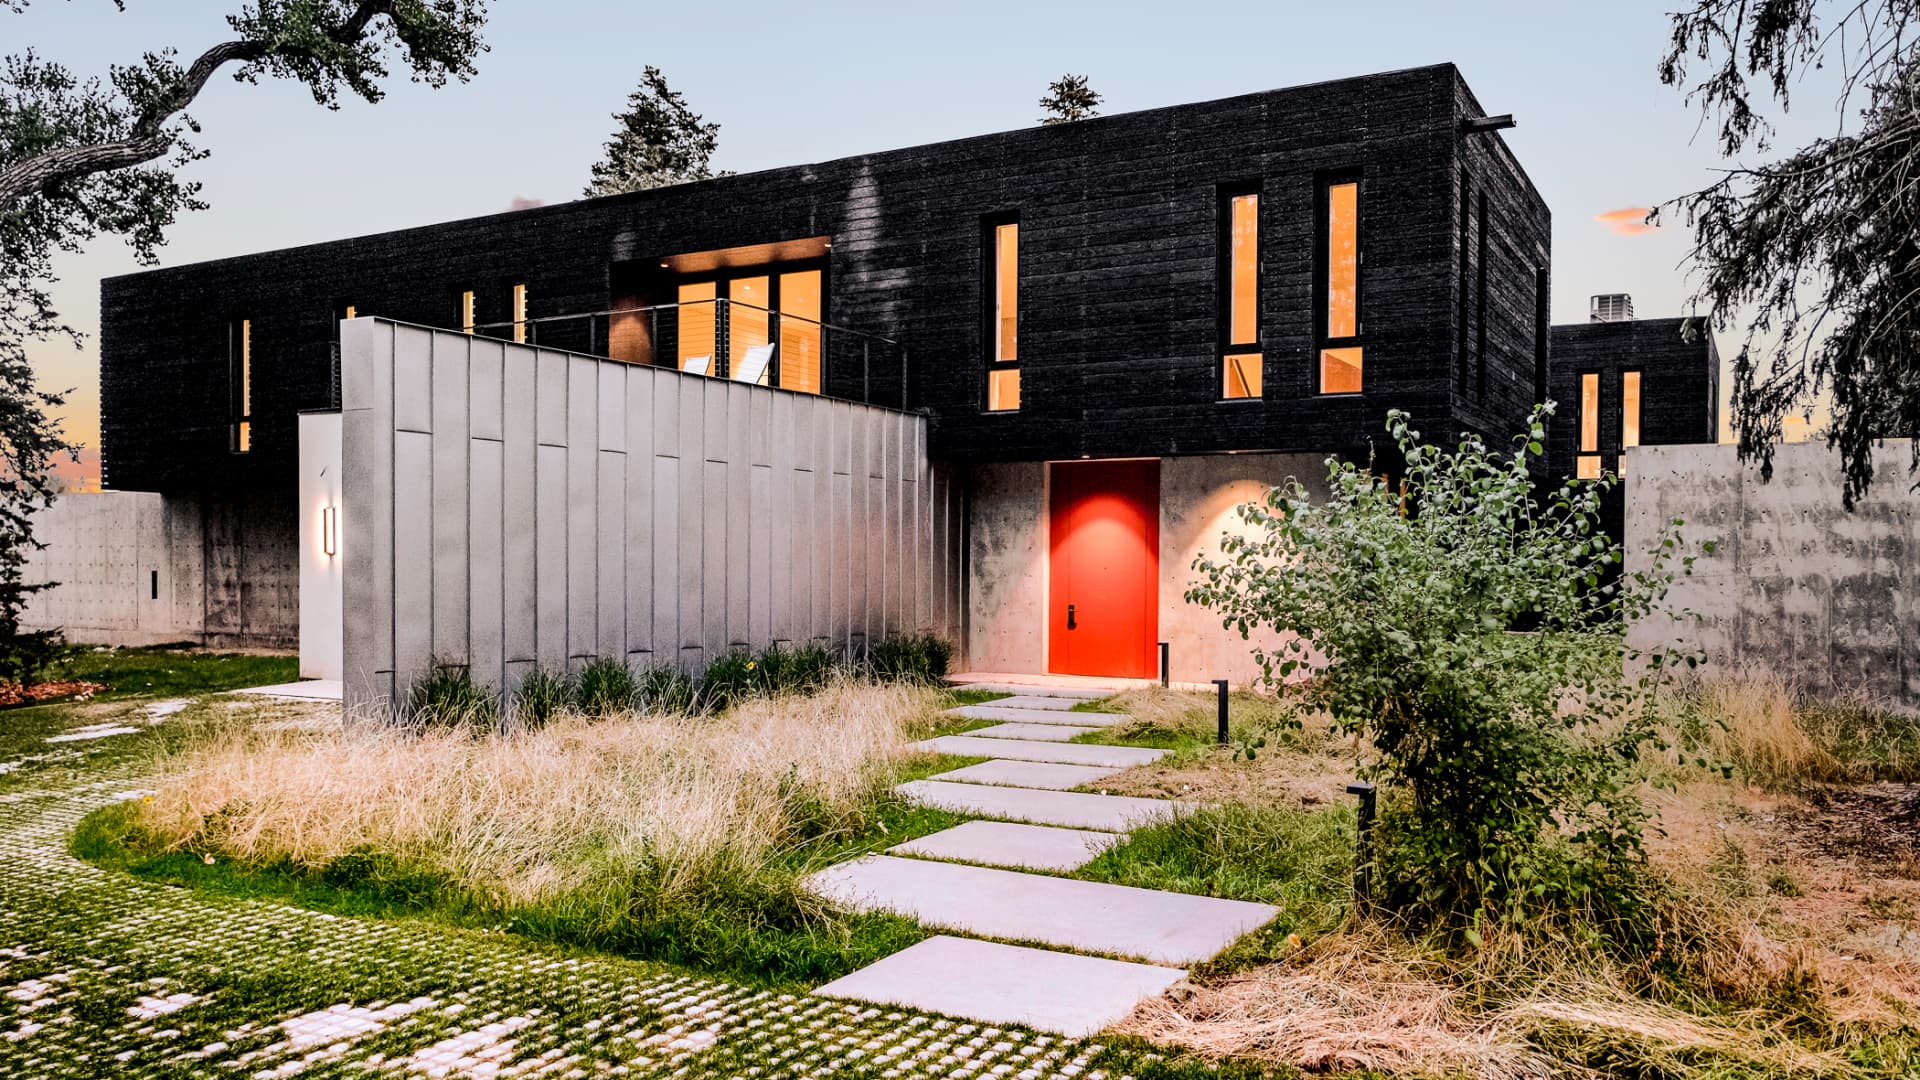 The modern home's facade blends charred-wood, concrete and glass.